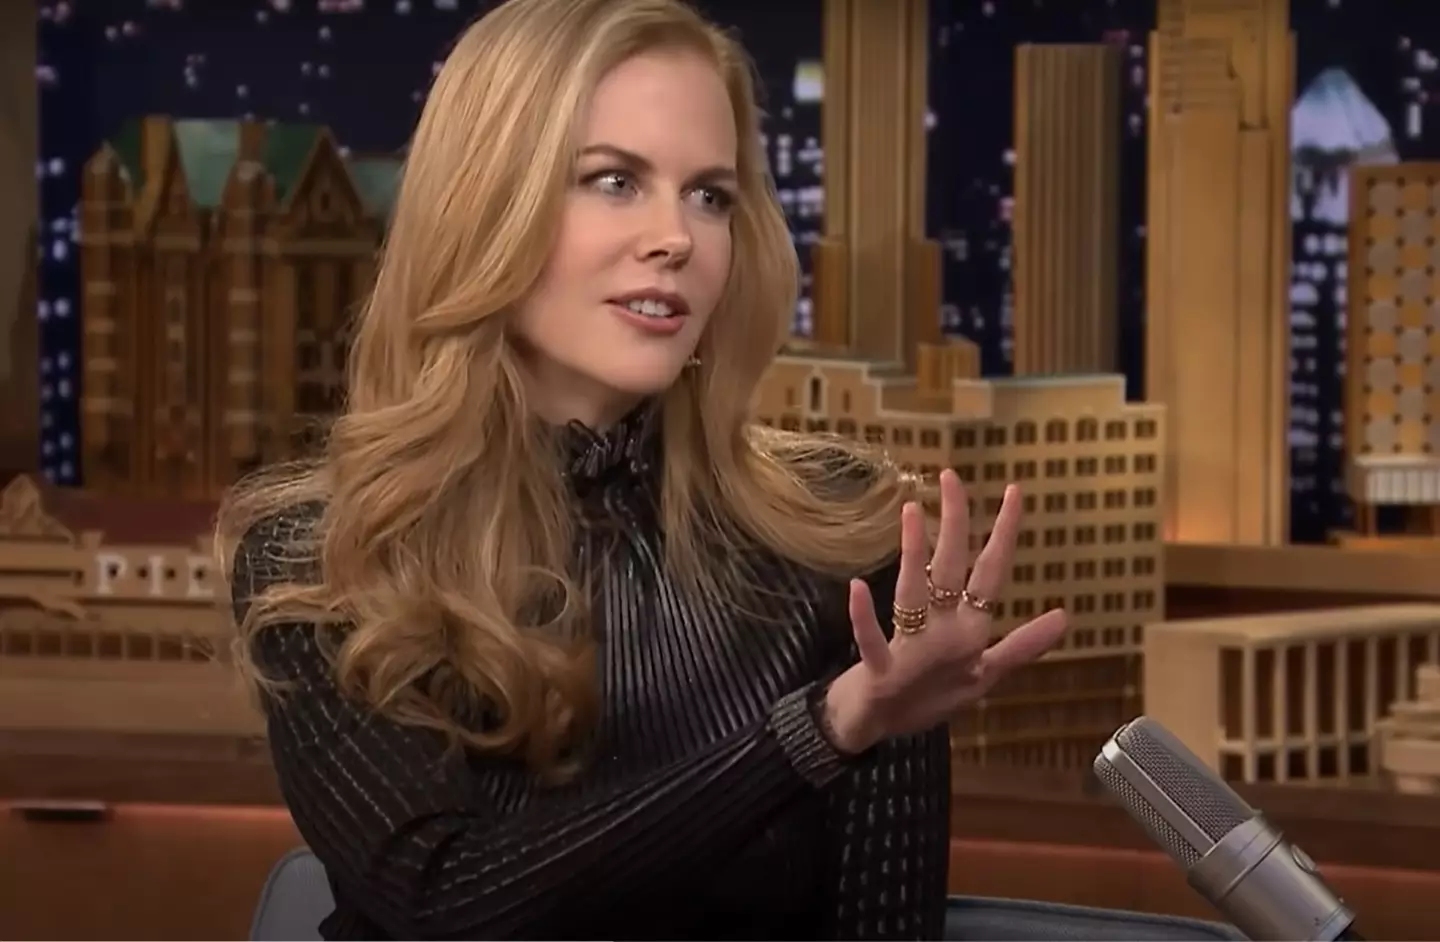 Nicole Kidman revealed she'd once had a thing for Jimmy Fallon.